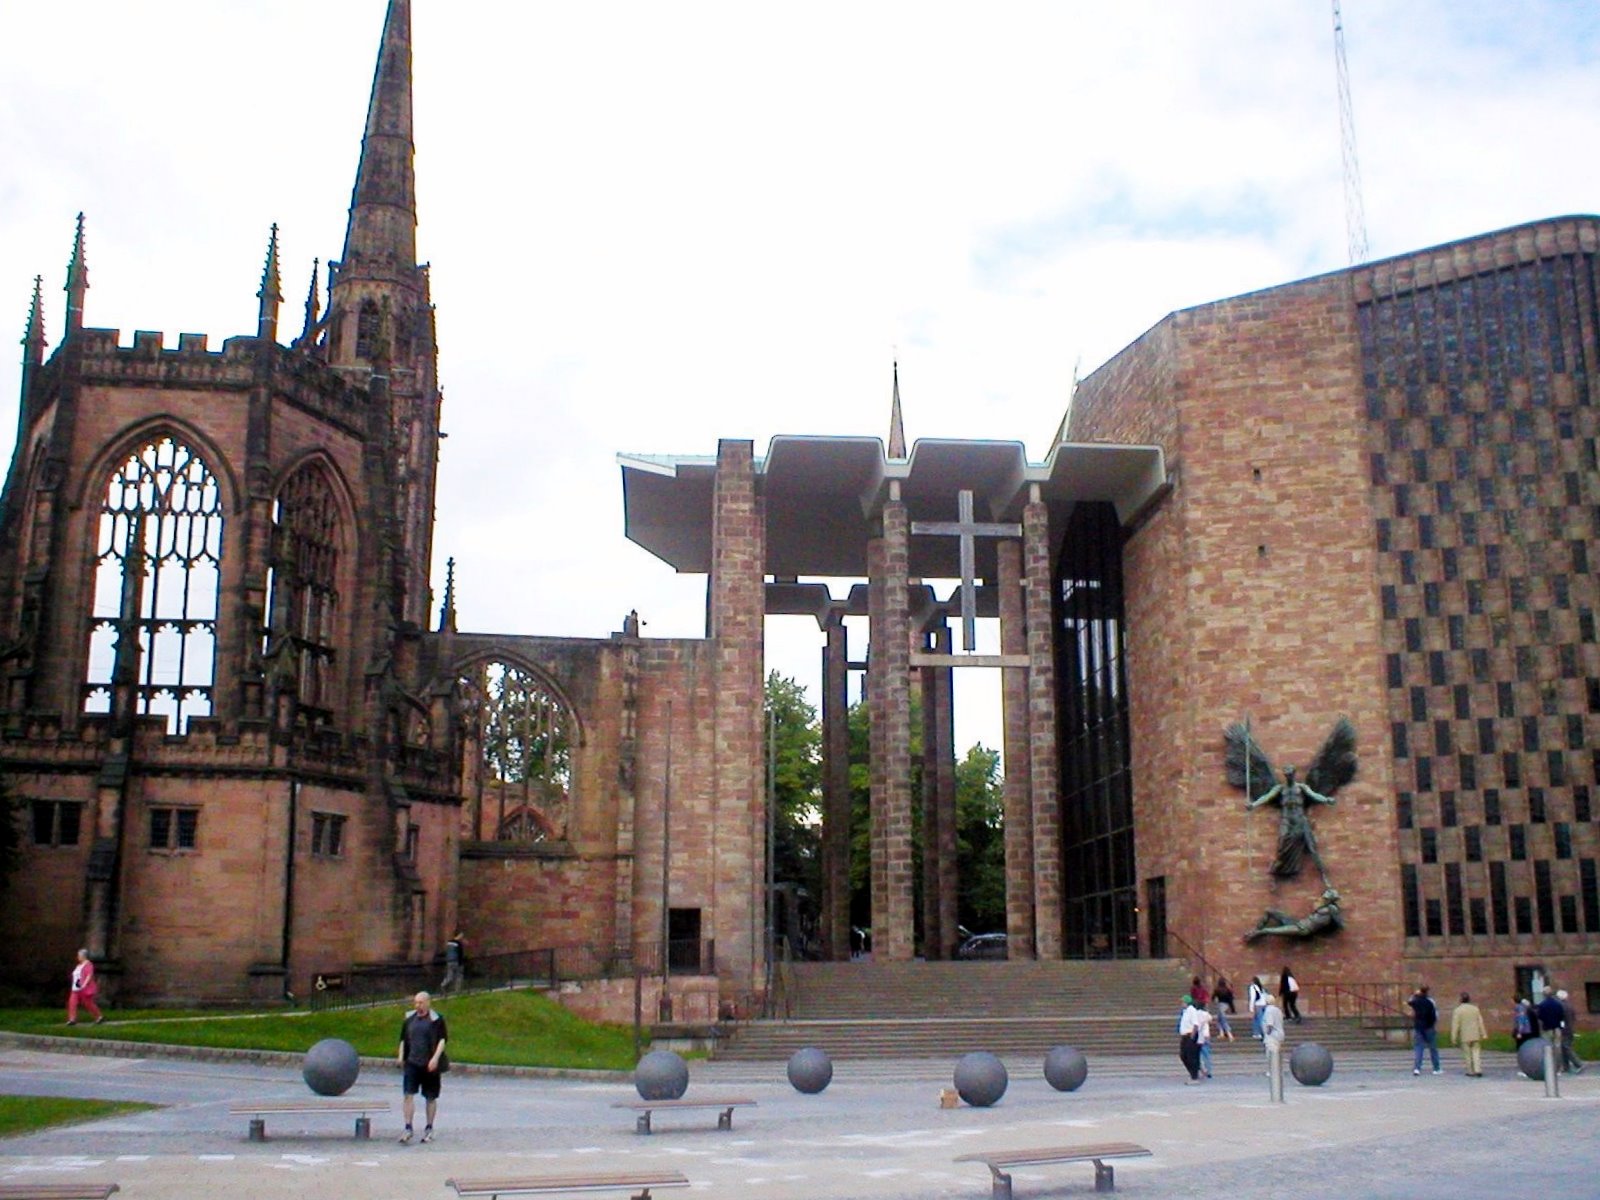 http://upload.wikimedia.org/wikipedia/commons/8/83/Coventry_cathedral.jpg